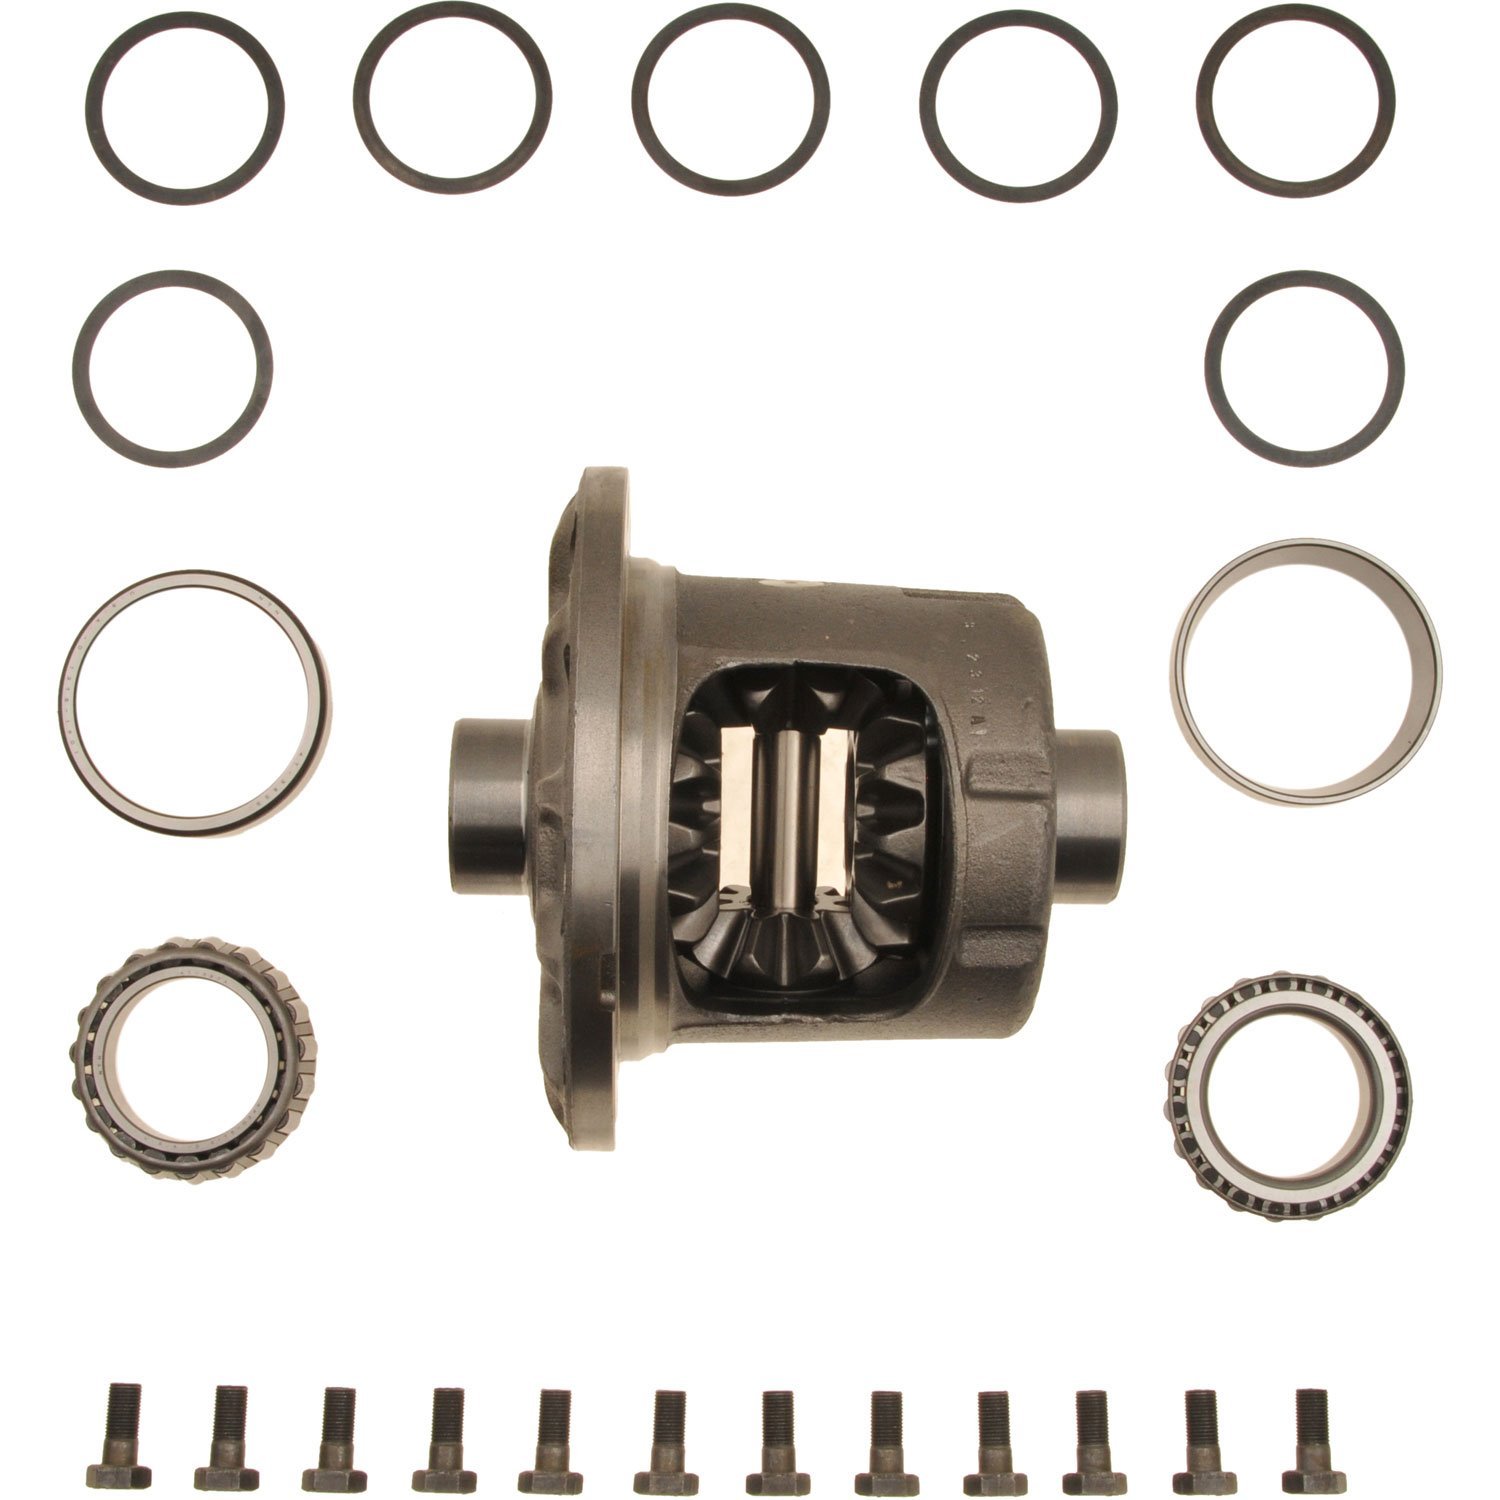 Trac-Lok Limited Slip Differential Assembly Fits: Dana 60 Rear